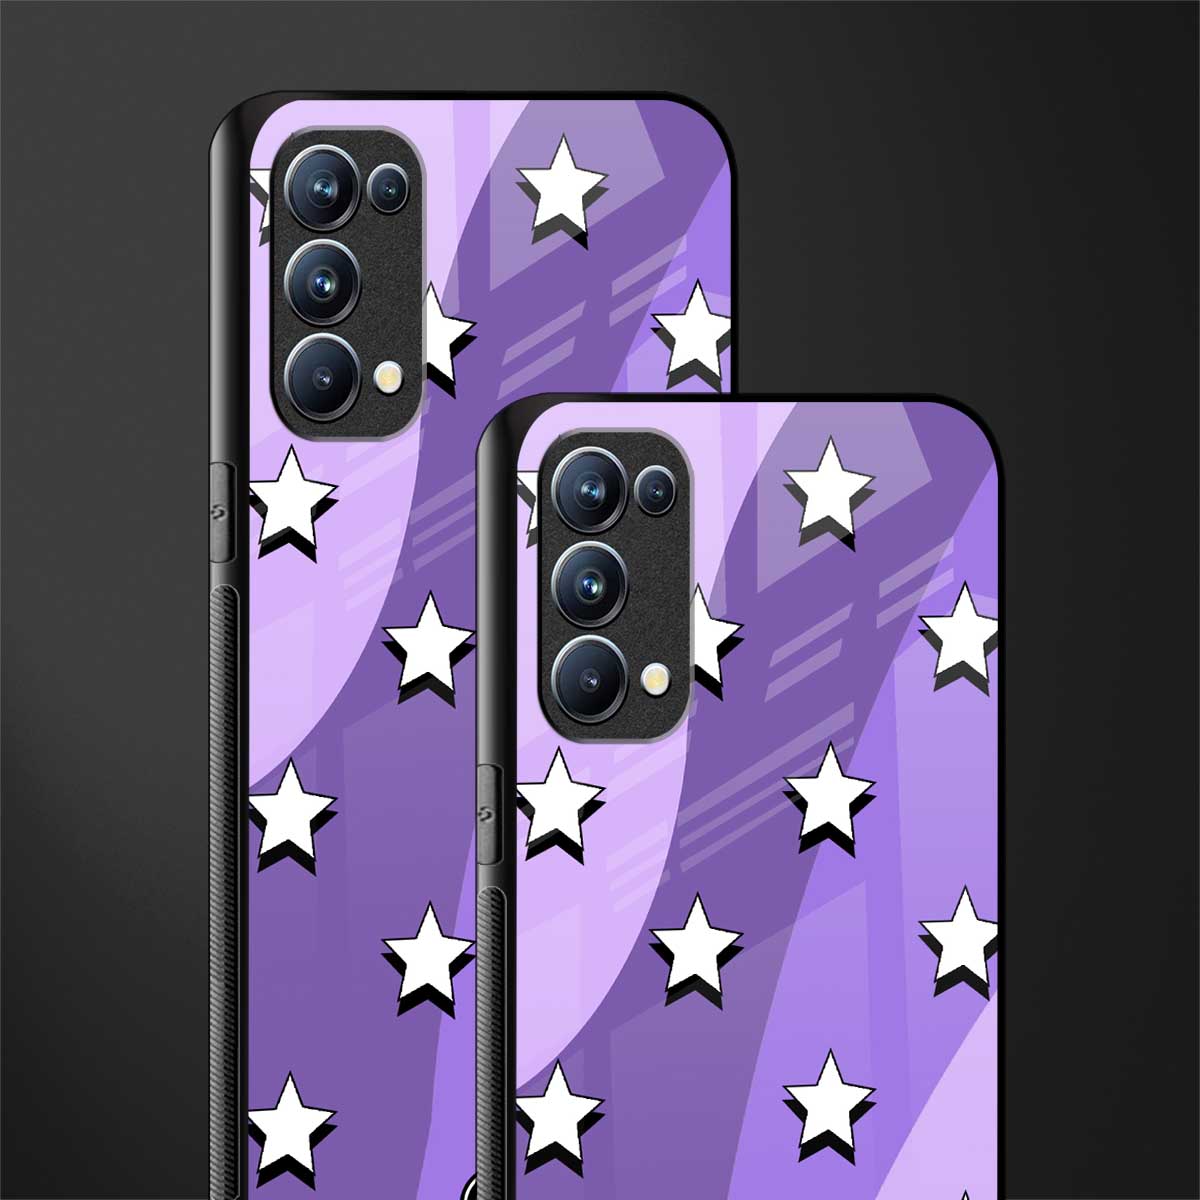 lost in paradise grape edition back phone cover | glass case for oppo reno 5